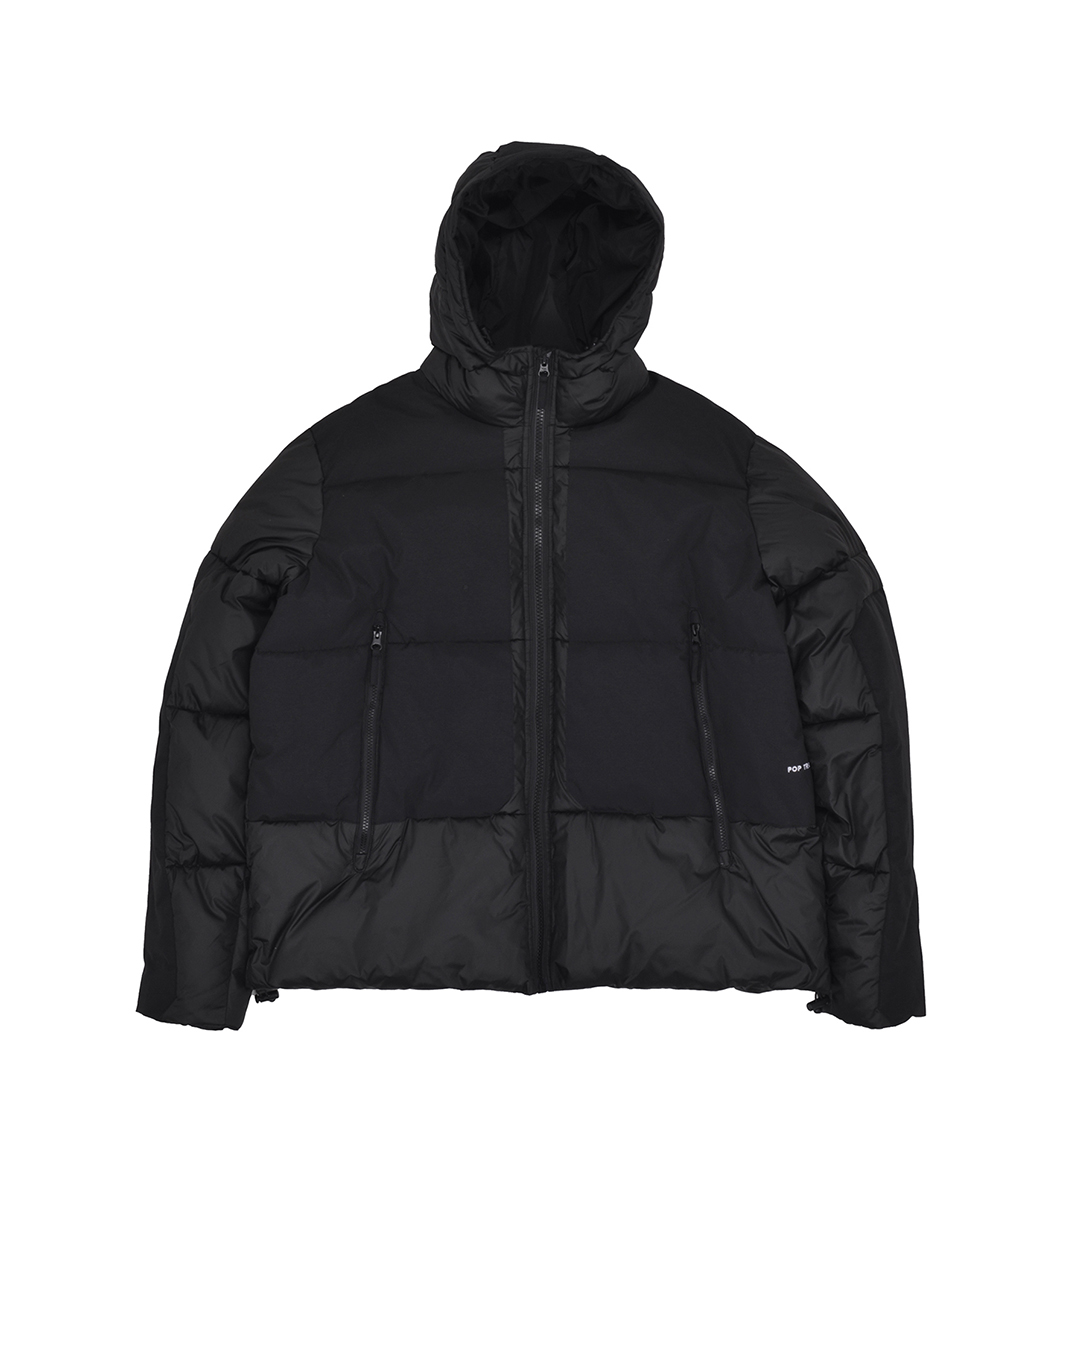 Pop Trading Company AW23 Collection Drop 2 - Pop Trading Company